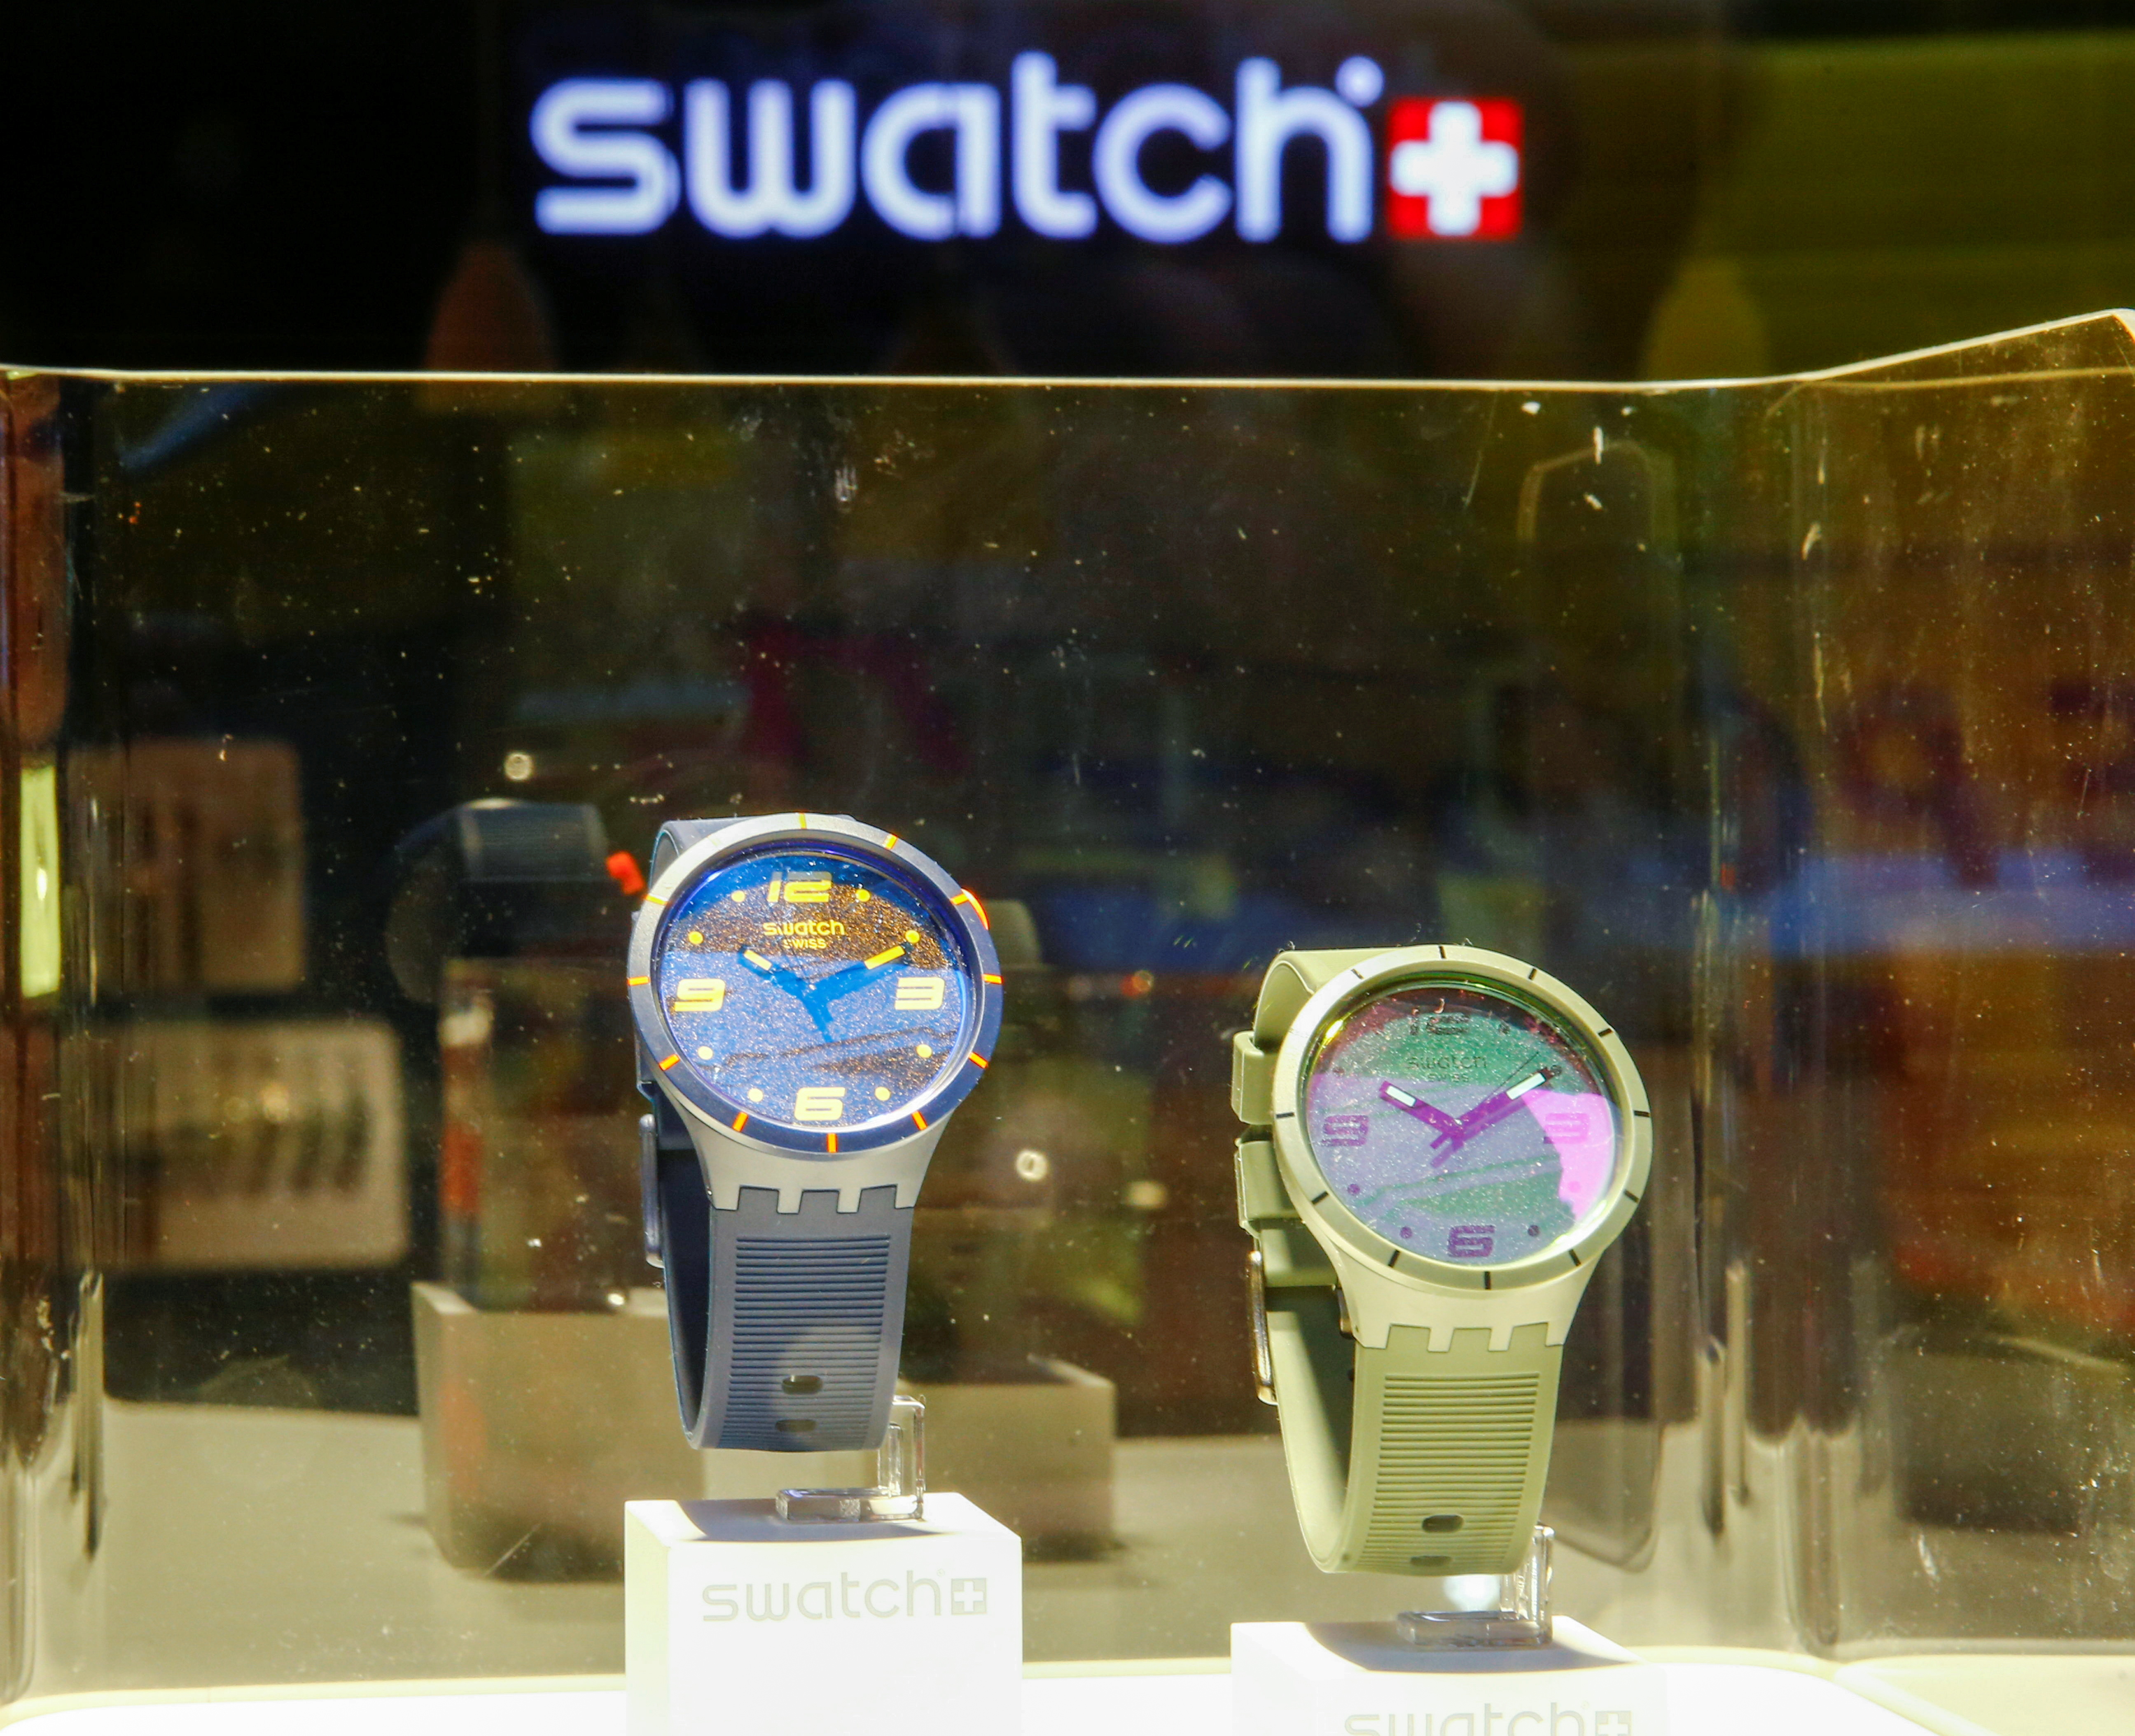 Watches are displayed at a Swatch store, which is closed during a partial lockdown as the spread of the coronavirus disease (COVID-19) continues, in Zurich, Switzerland January 28, 2021. REUTERS/Arnd Wiegmann